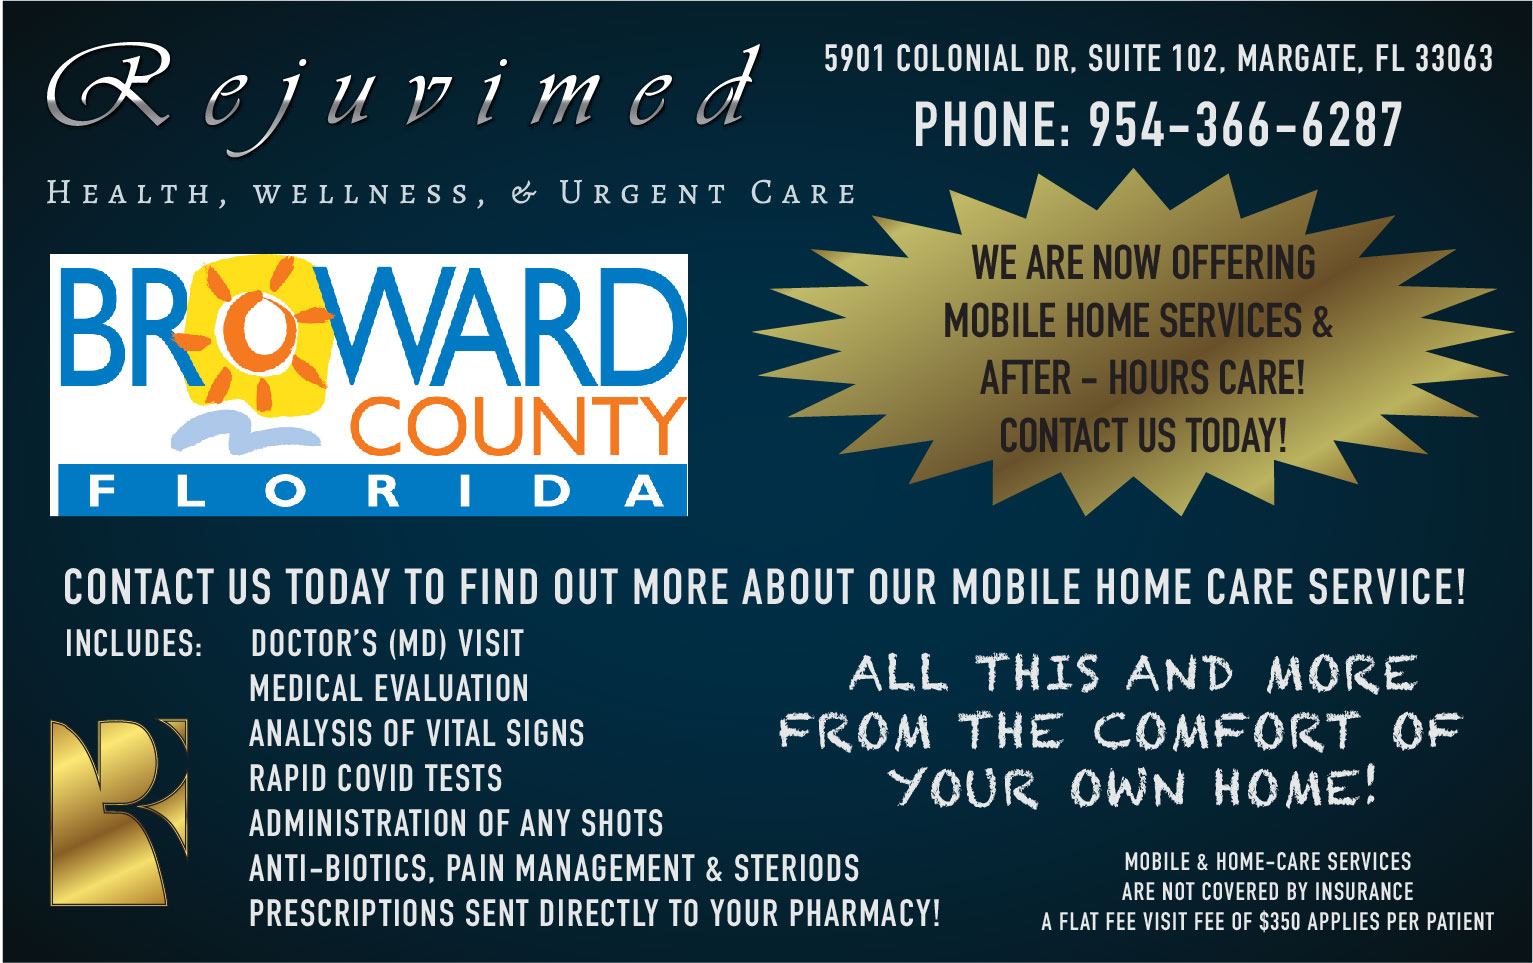 Broward Count FL - Home Health Services